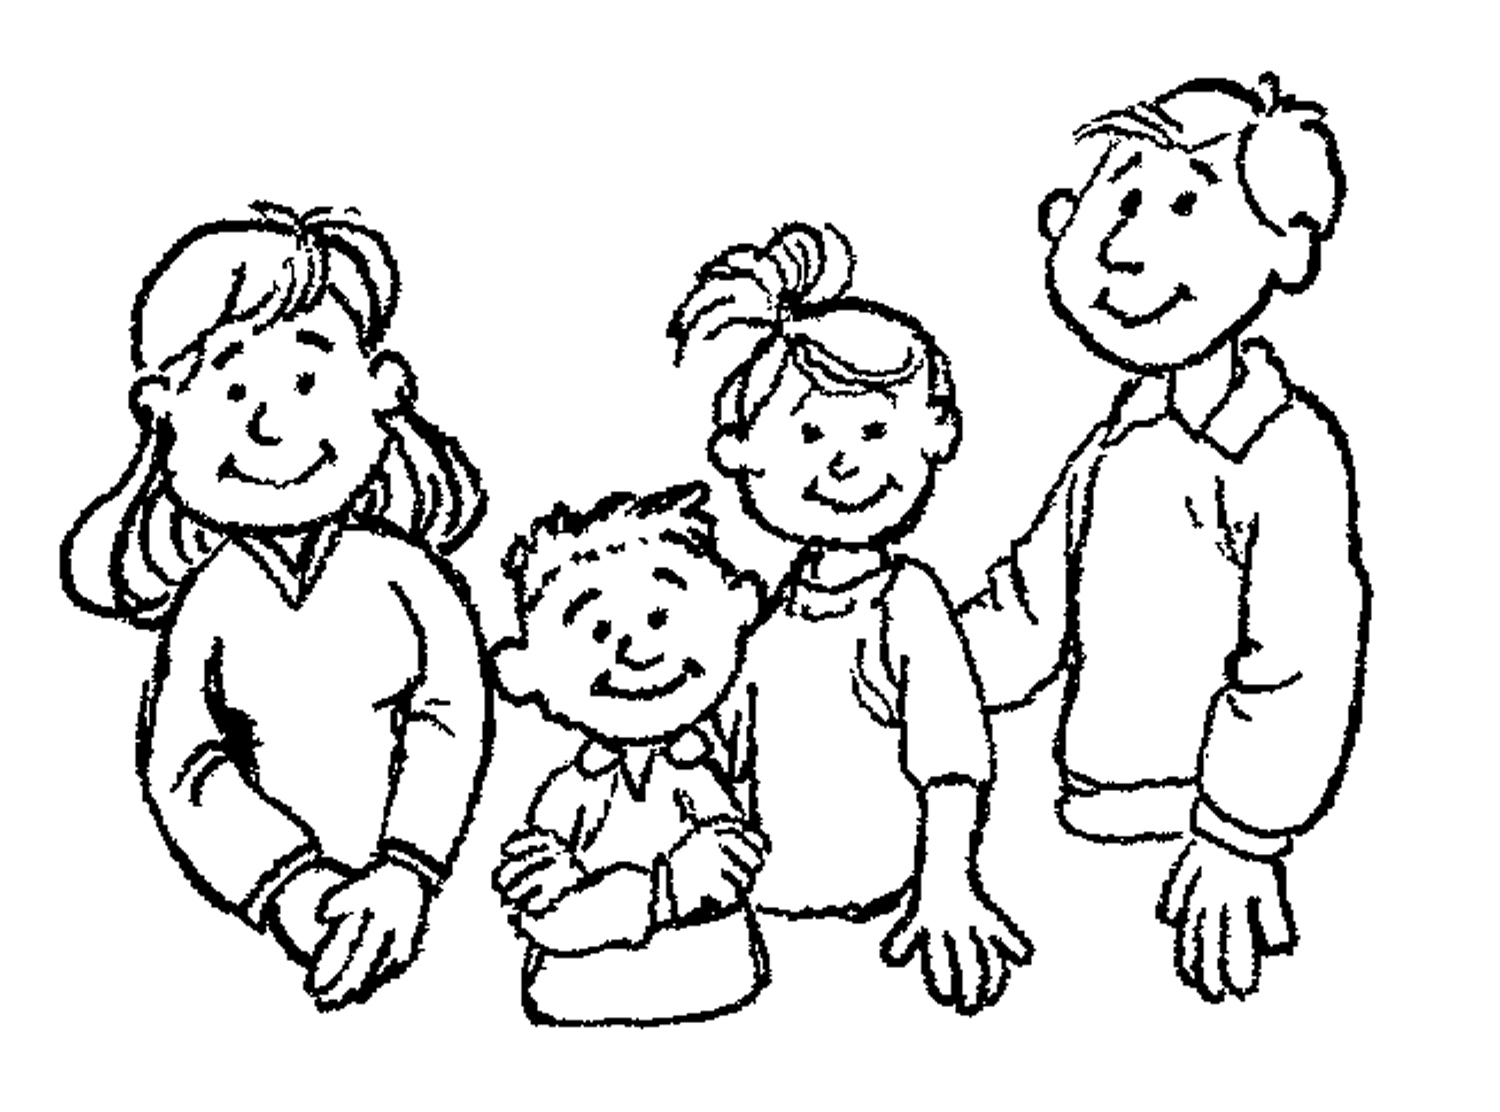 Free Family Portraits Cliparts, Download Free Clip Art, Free